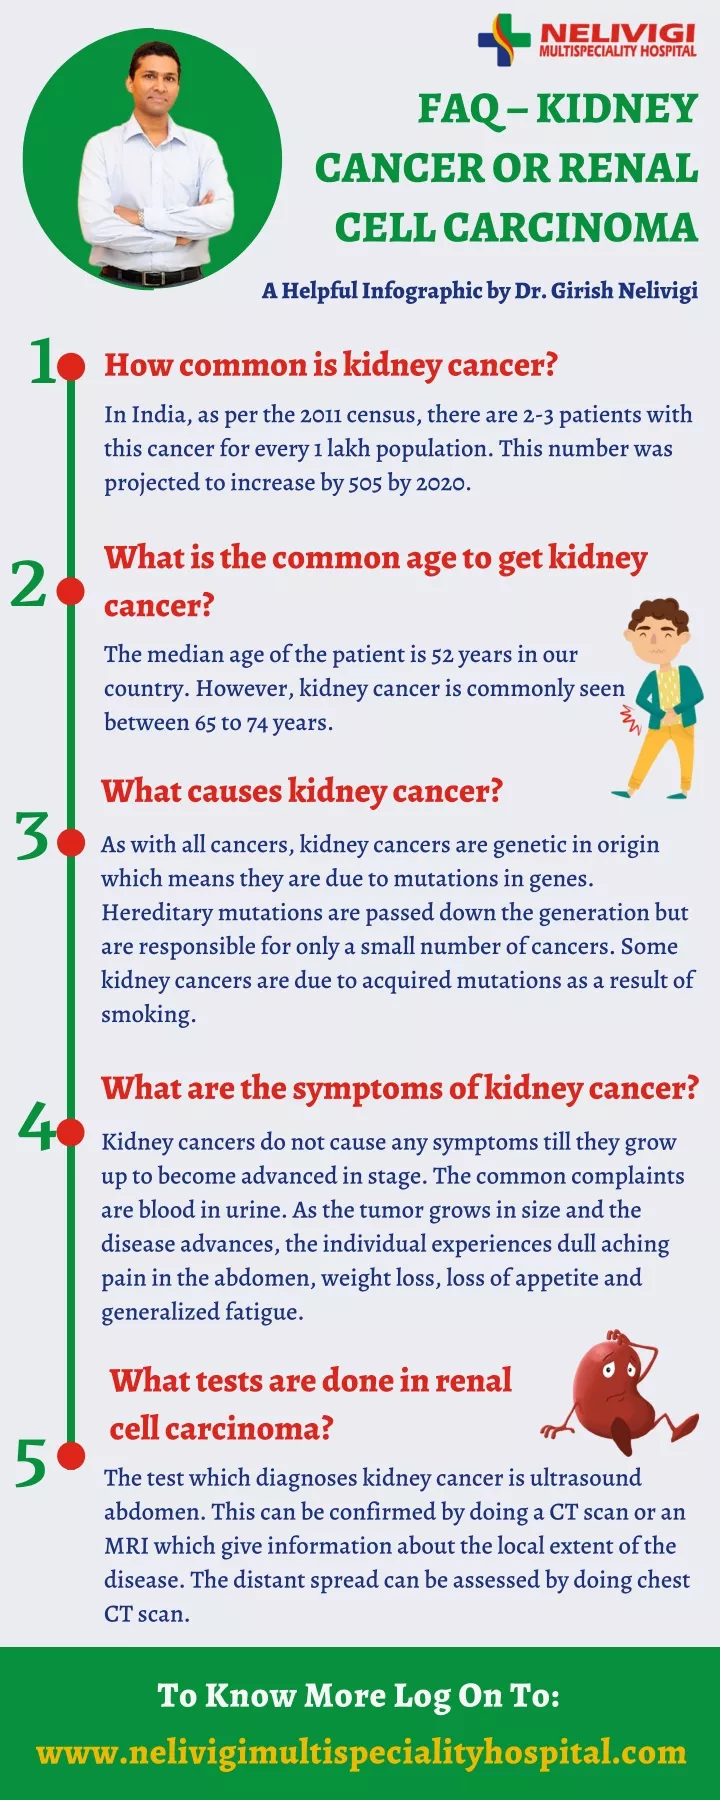 faq kidney cancer or renal cell carcinoma